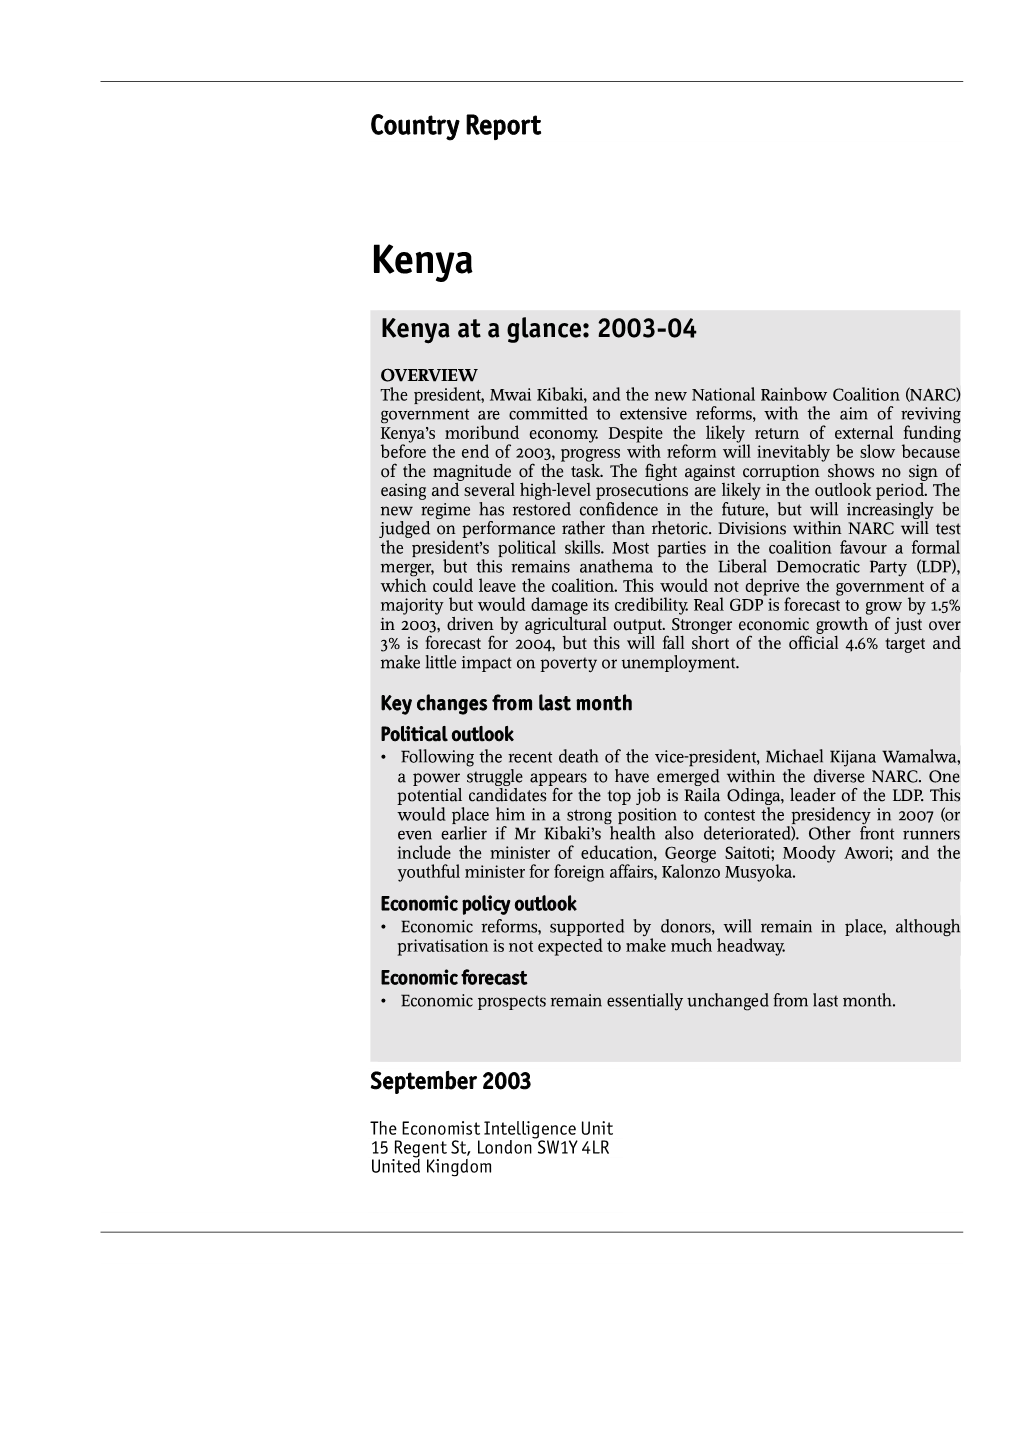 Country Report Kenya at a Glance: 2003-04